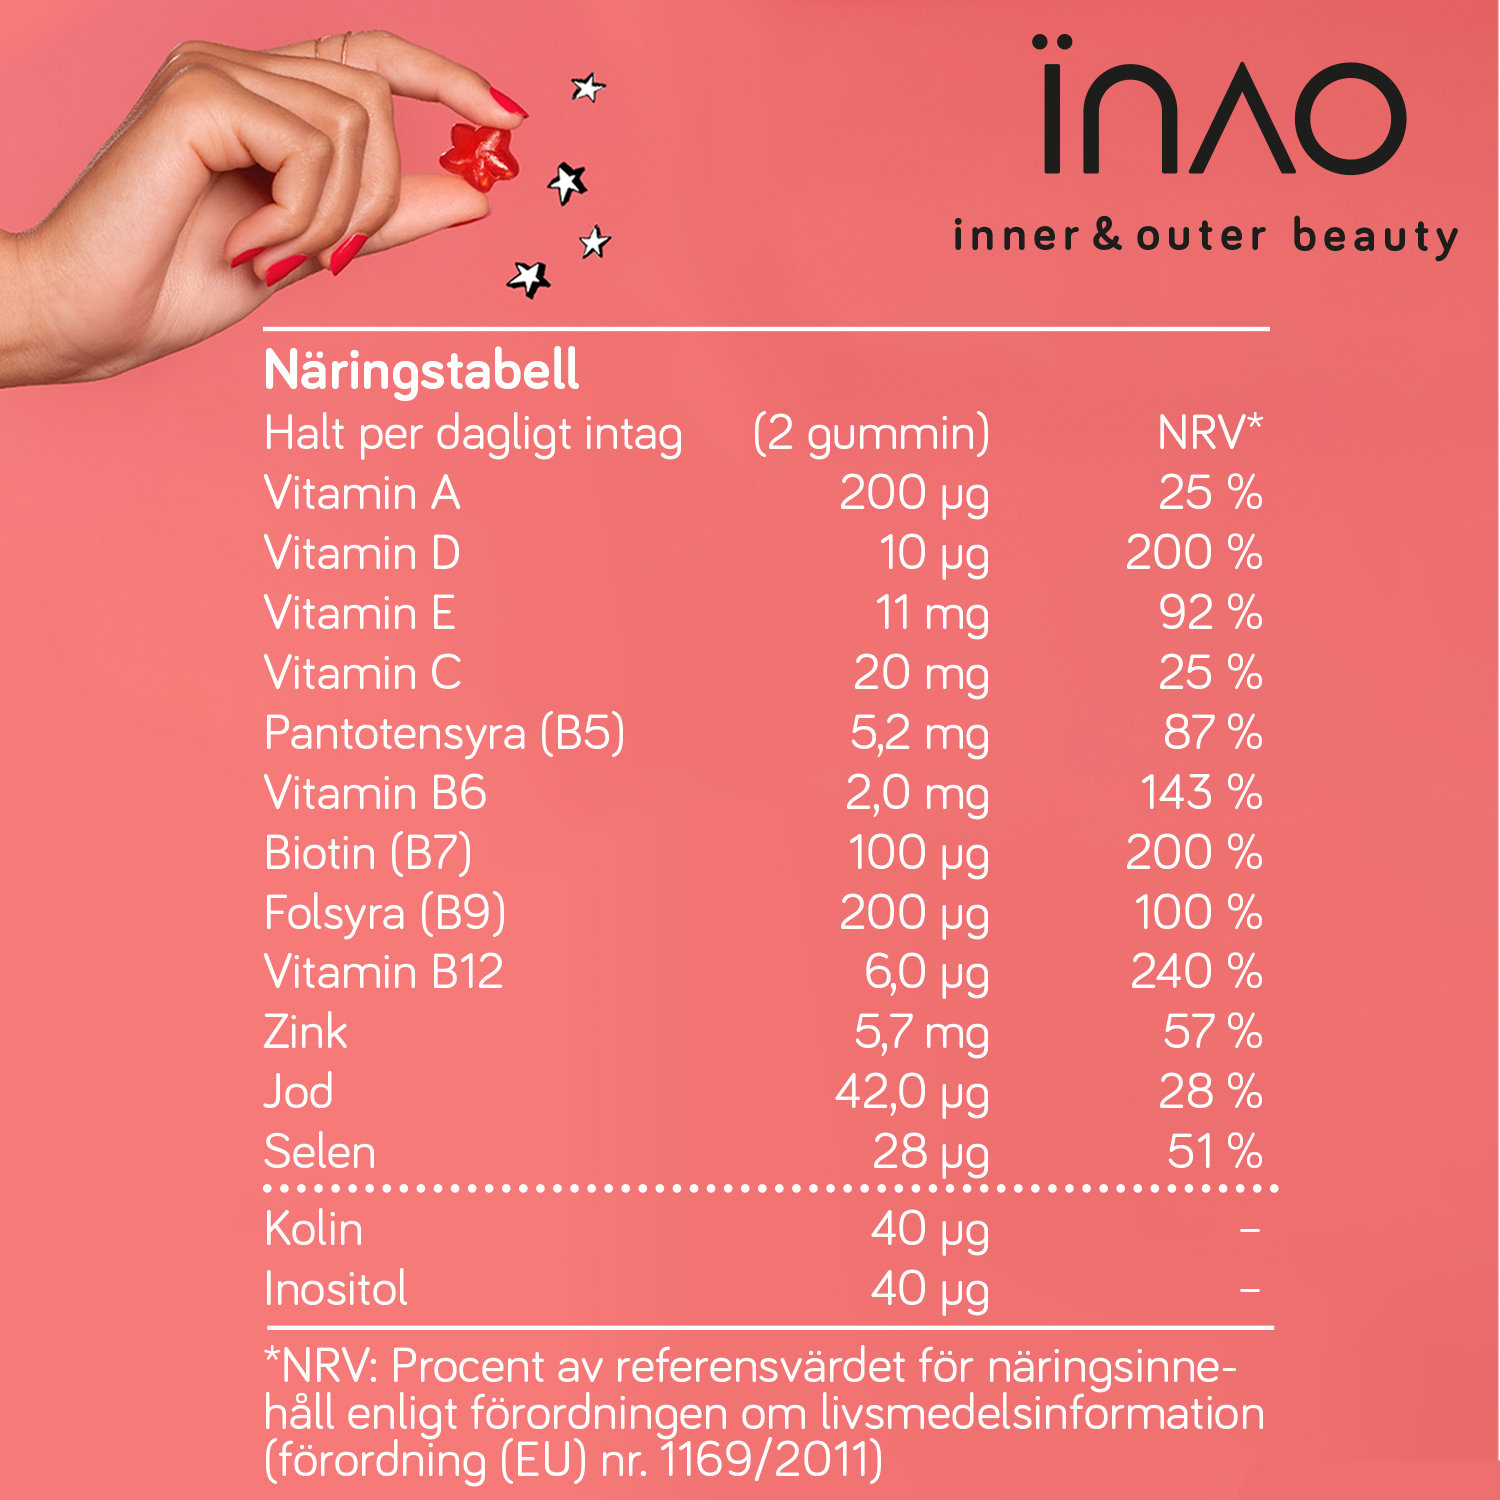 INAO Inner & Outer Beauty by essence Hair YEAH! 60 tuggtabletter